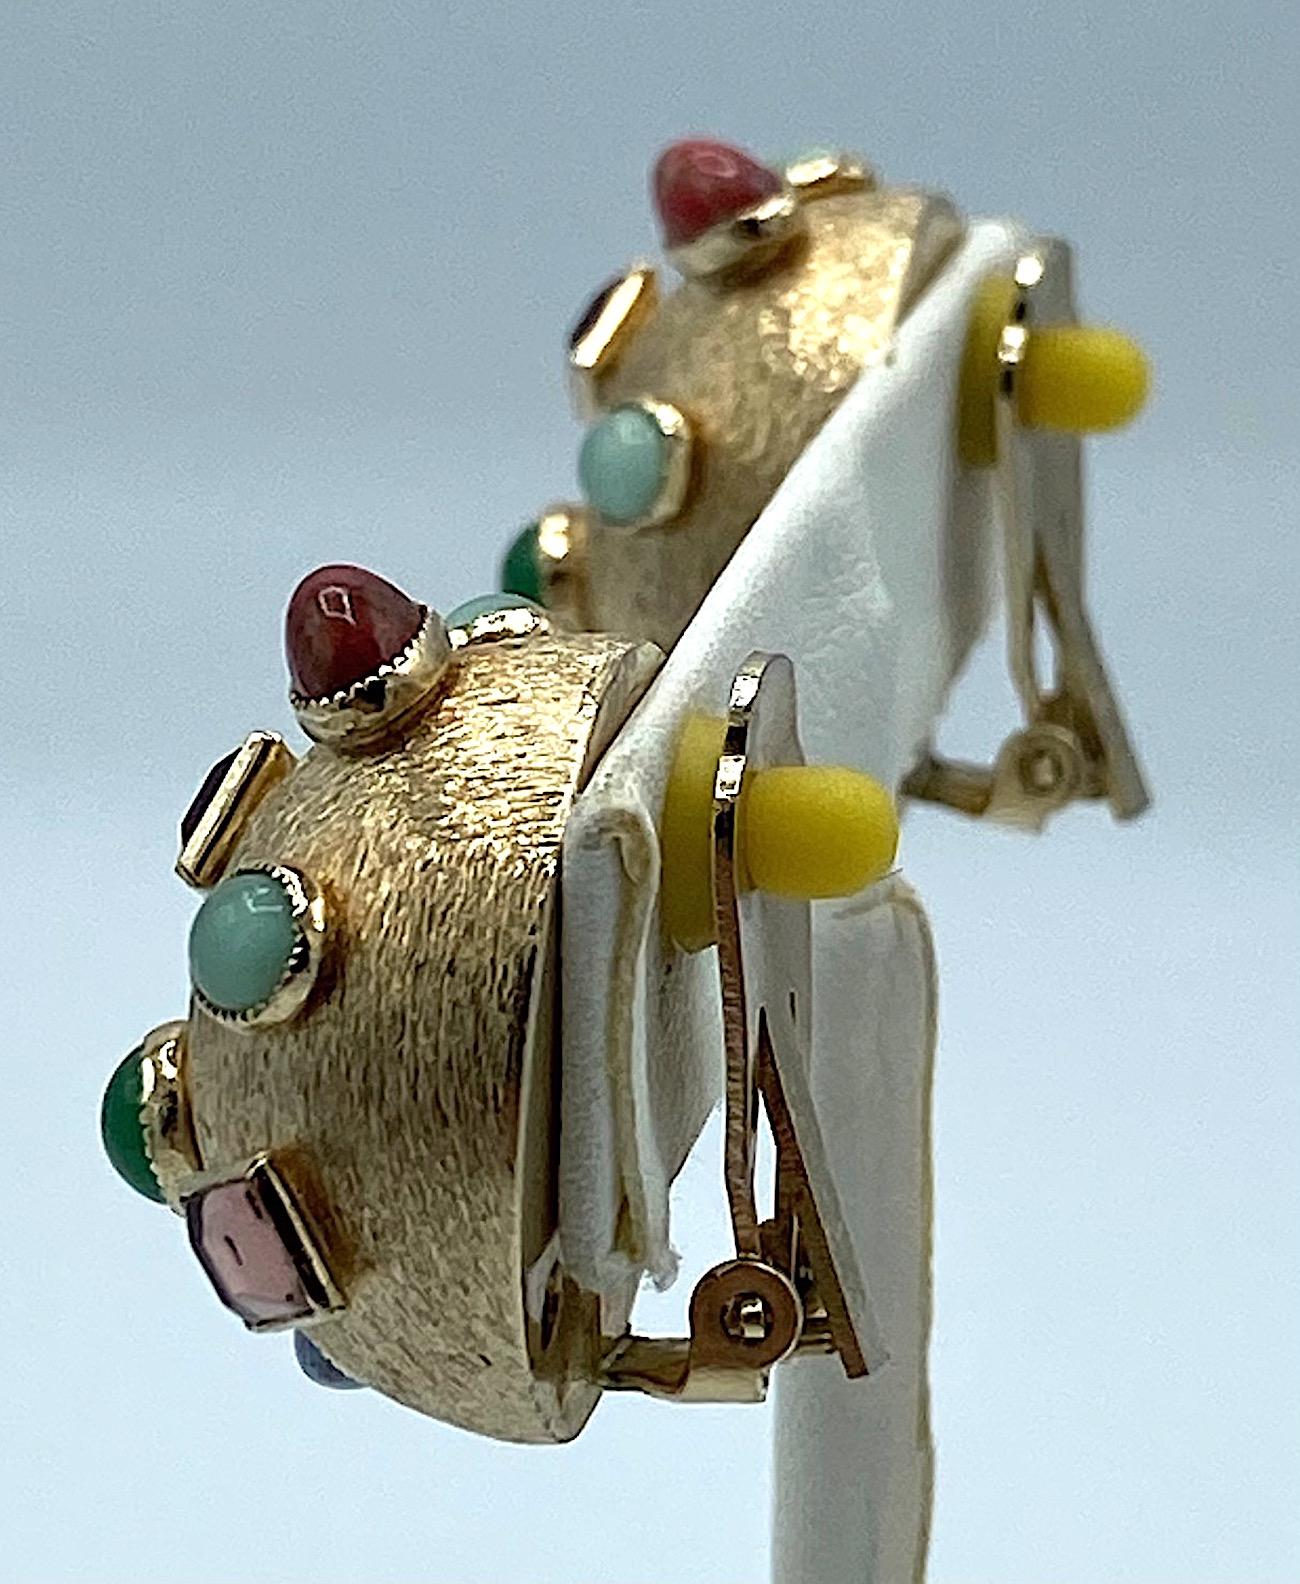 Bergère, New York, 1950s Gold and Jeweled Bracelet and Earring Set 8